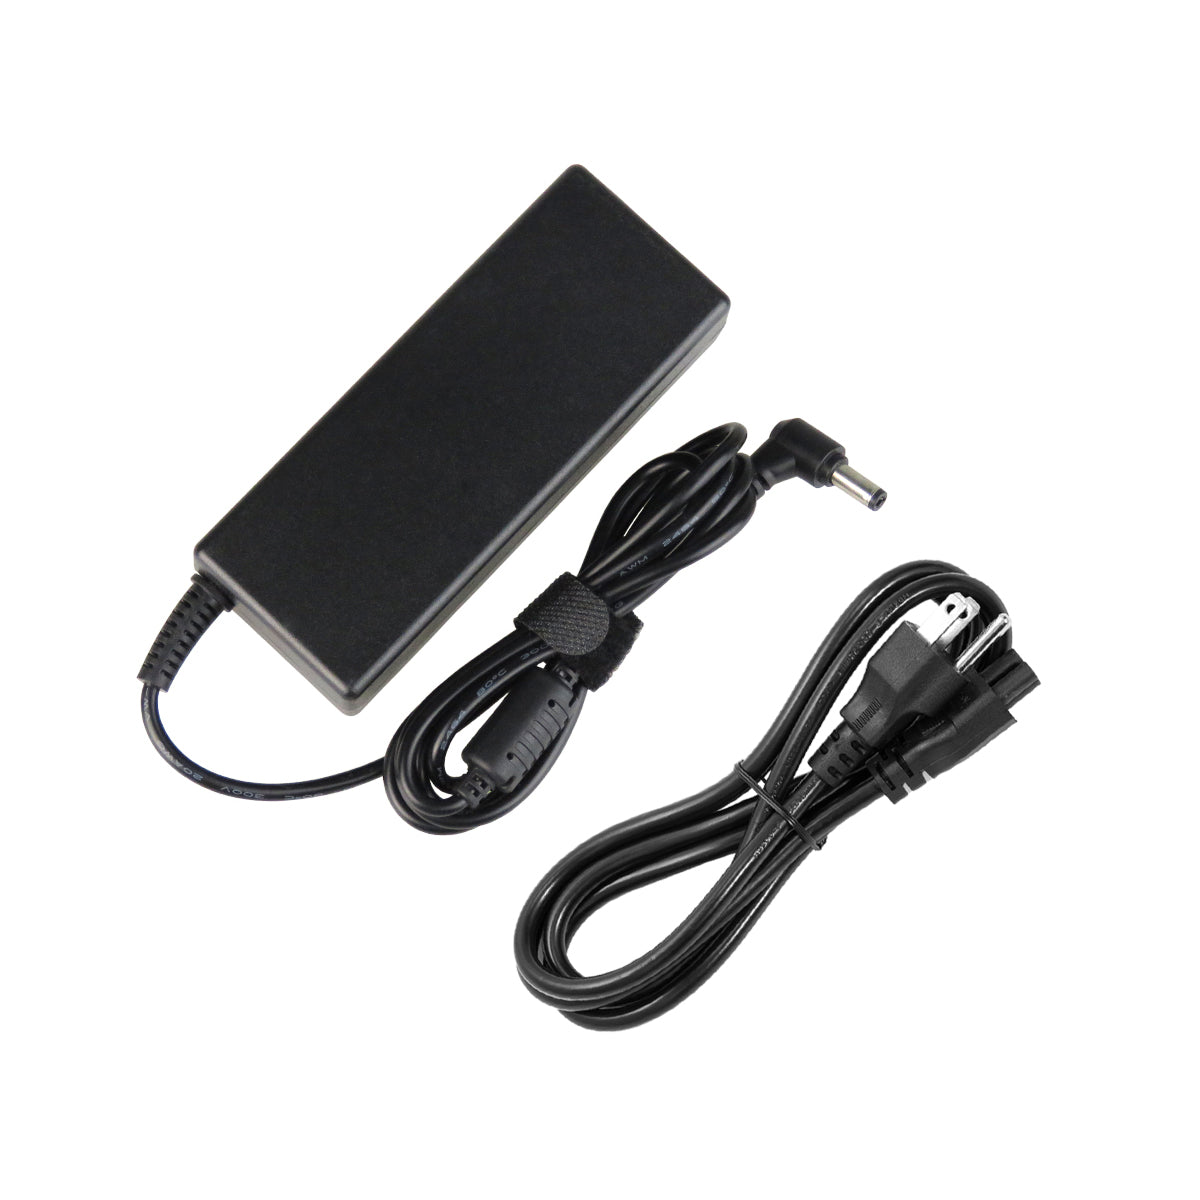 AC Adapter Charger for ASUS N51V Notebook.